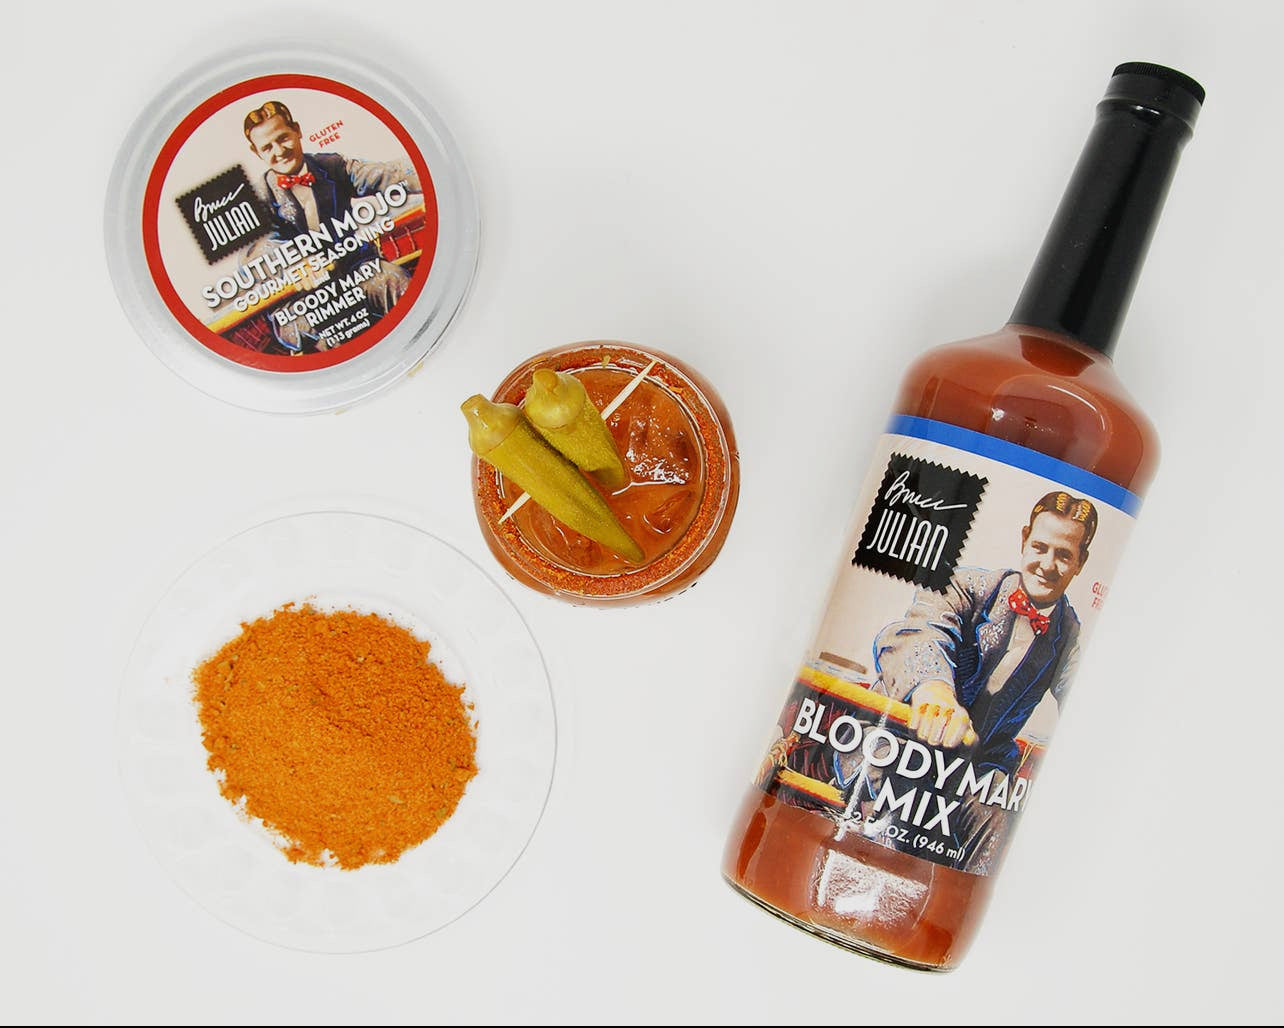 Bloody Mary mix with complimenting southern spice rimmer 